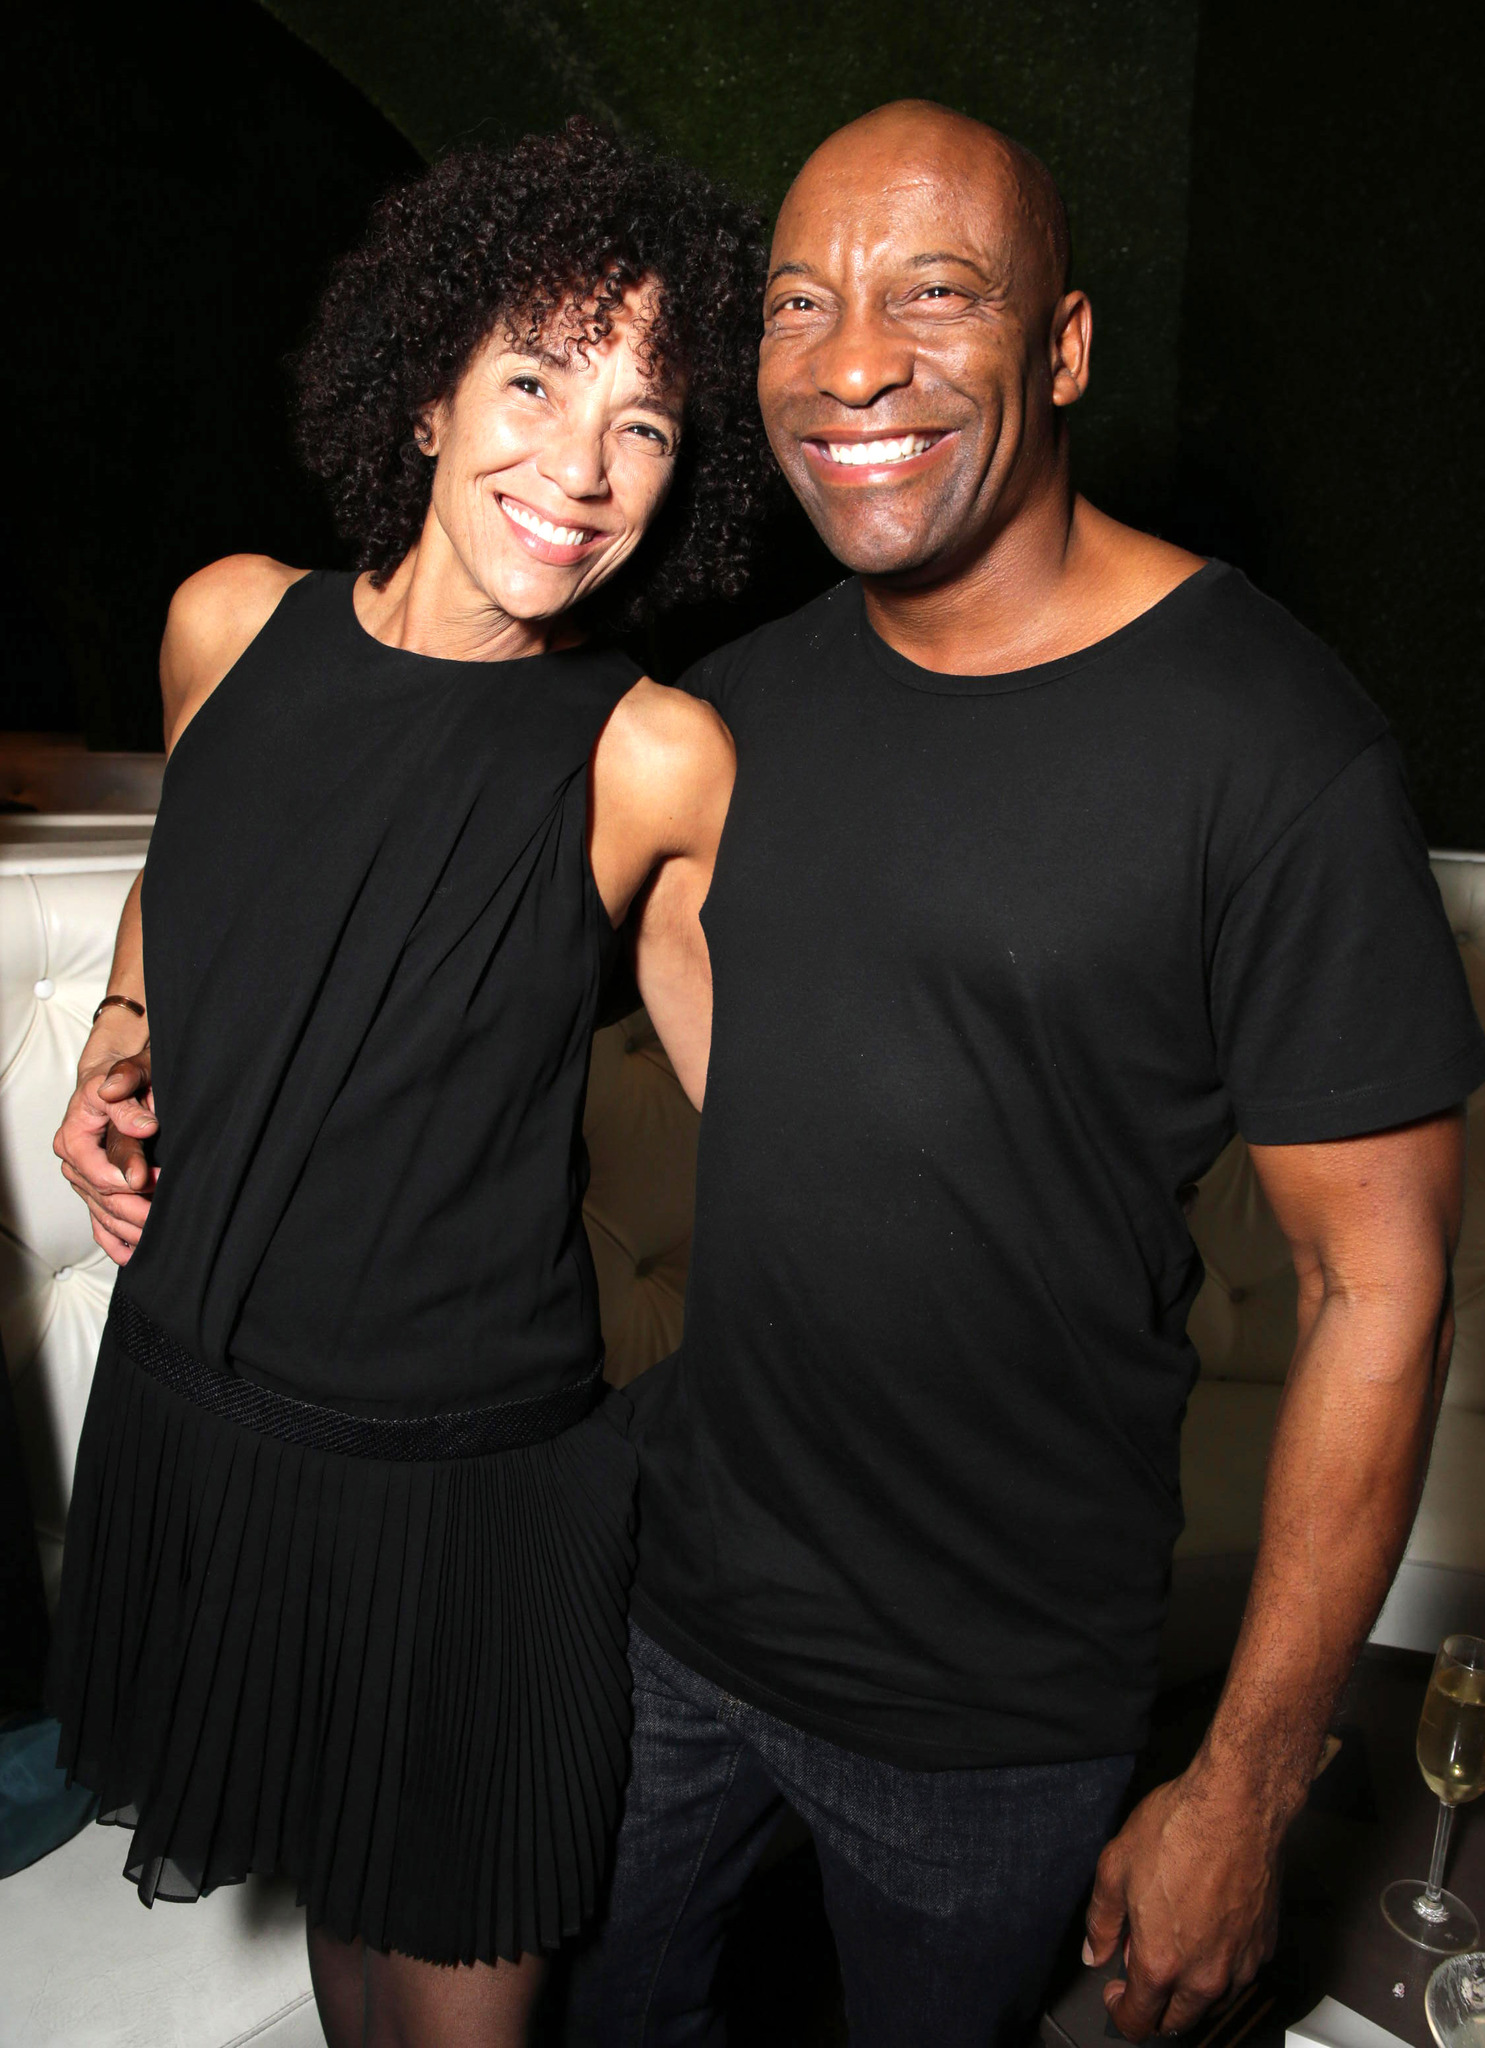 John Singleton and Stephanie Allain at event of Beyond the Lights (2014)